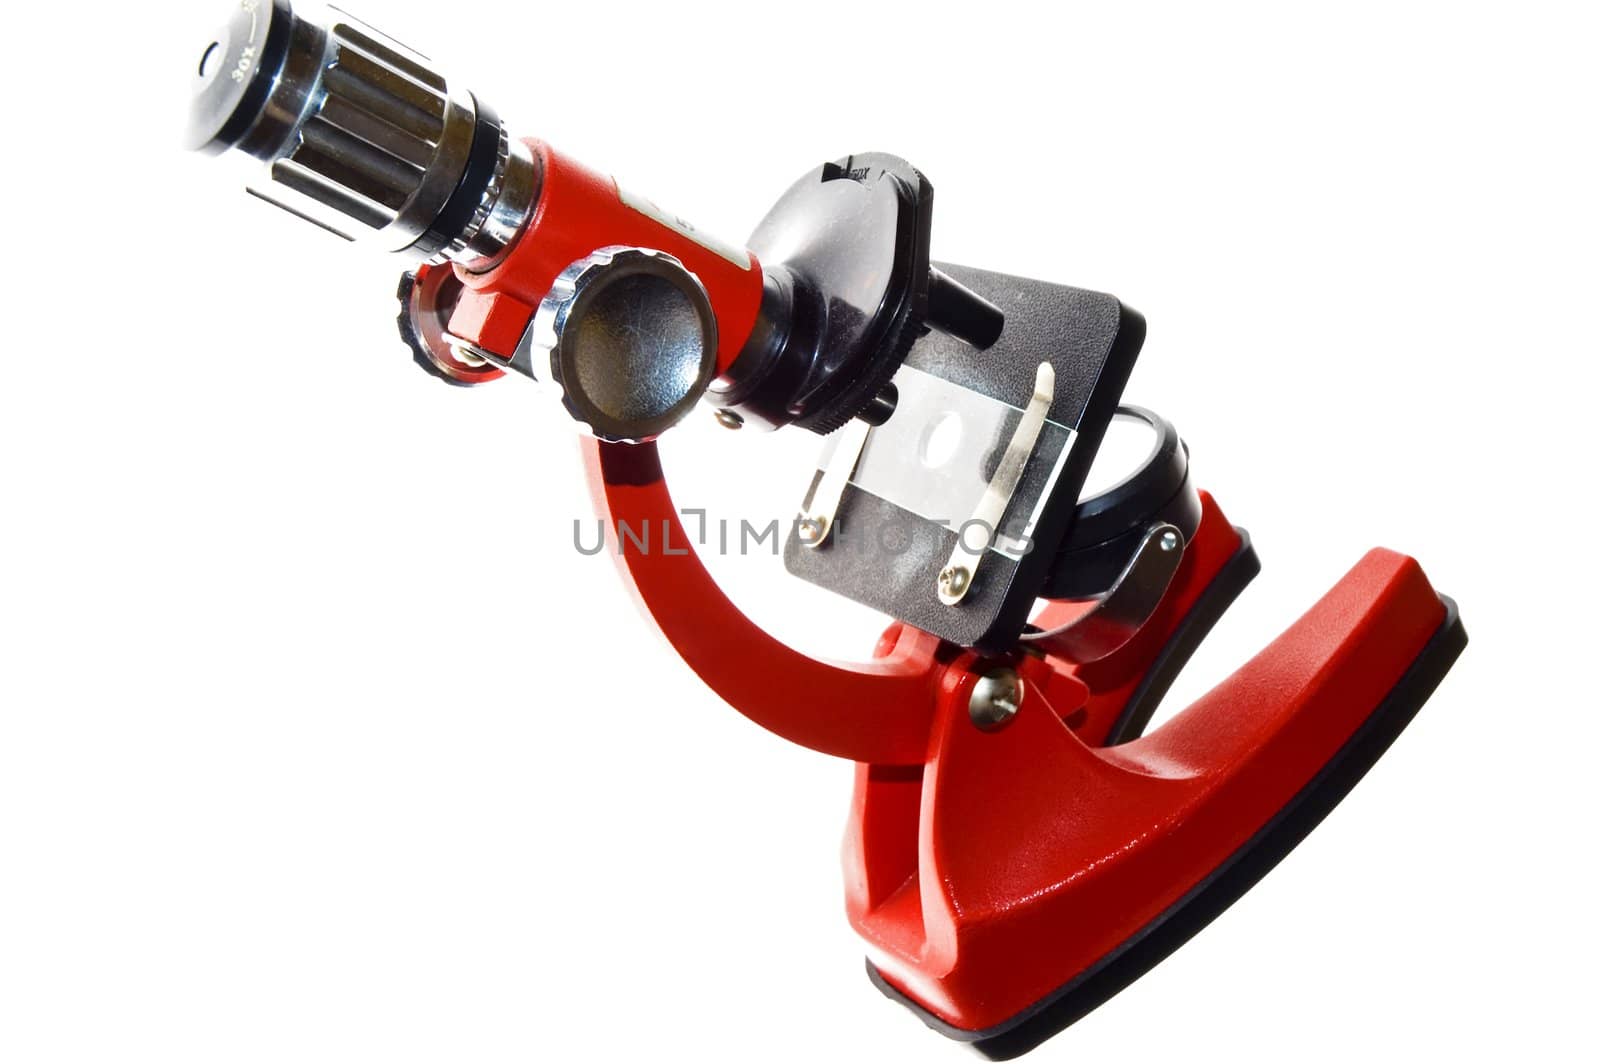 Microscope isolated over white background